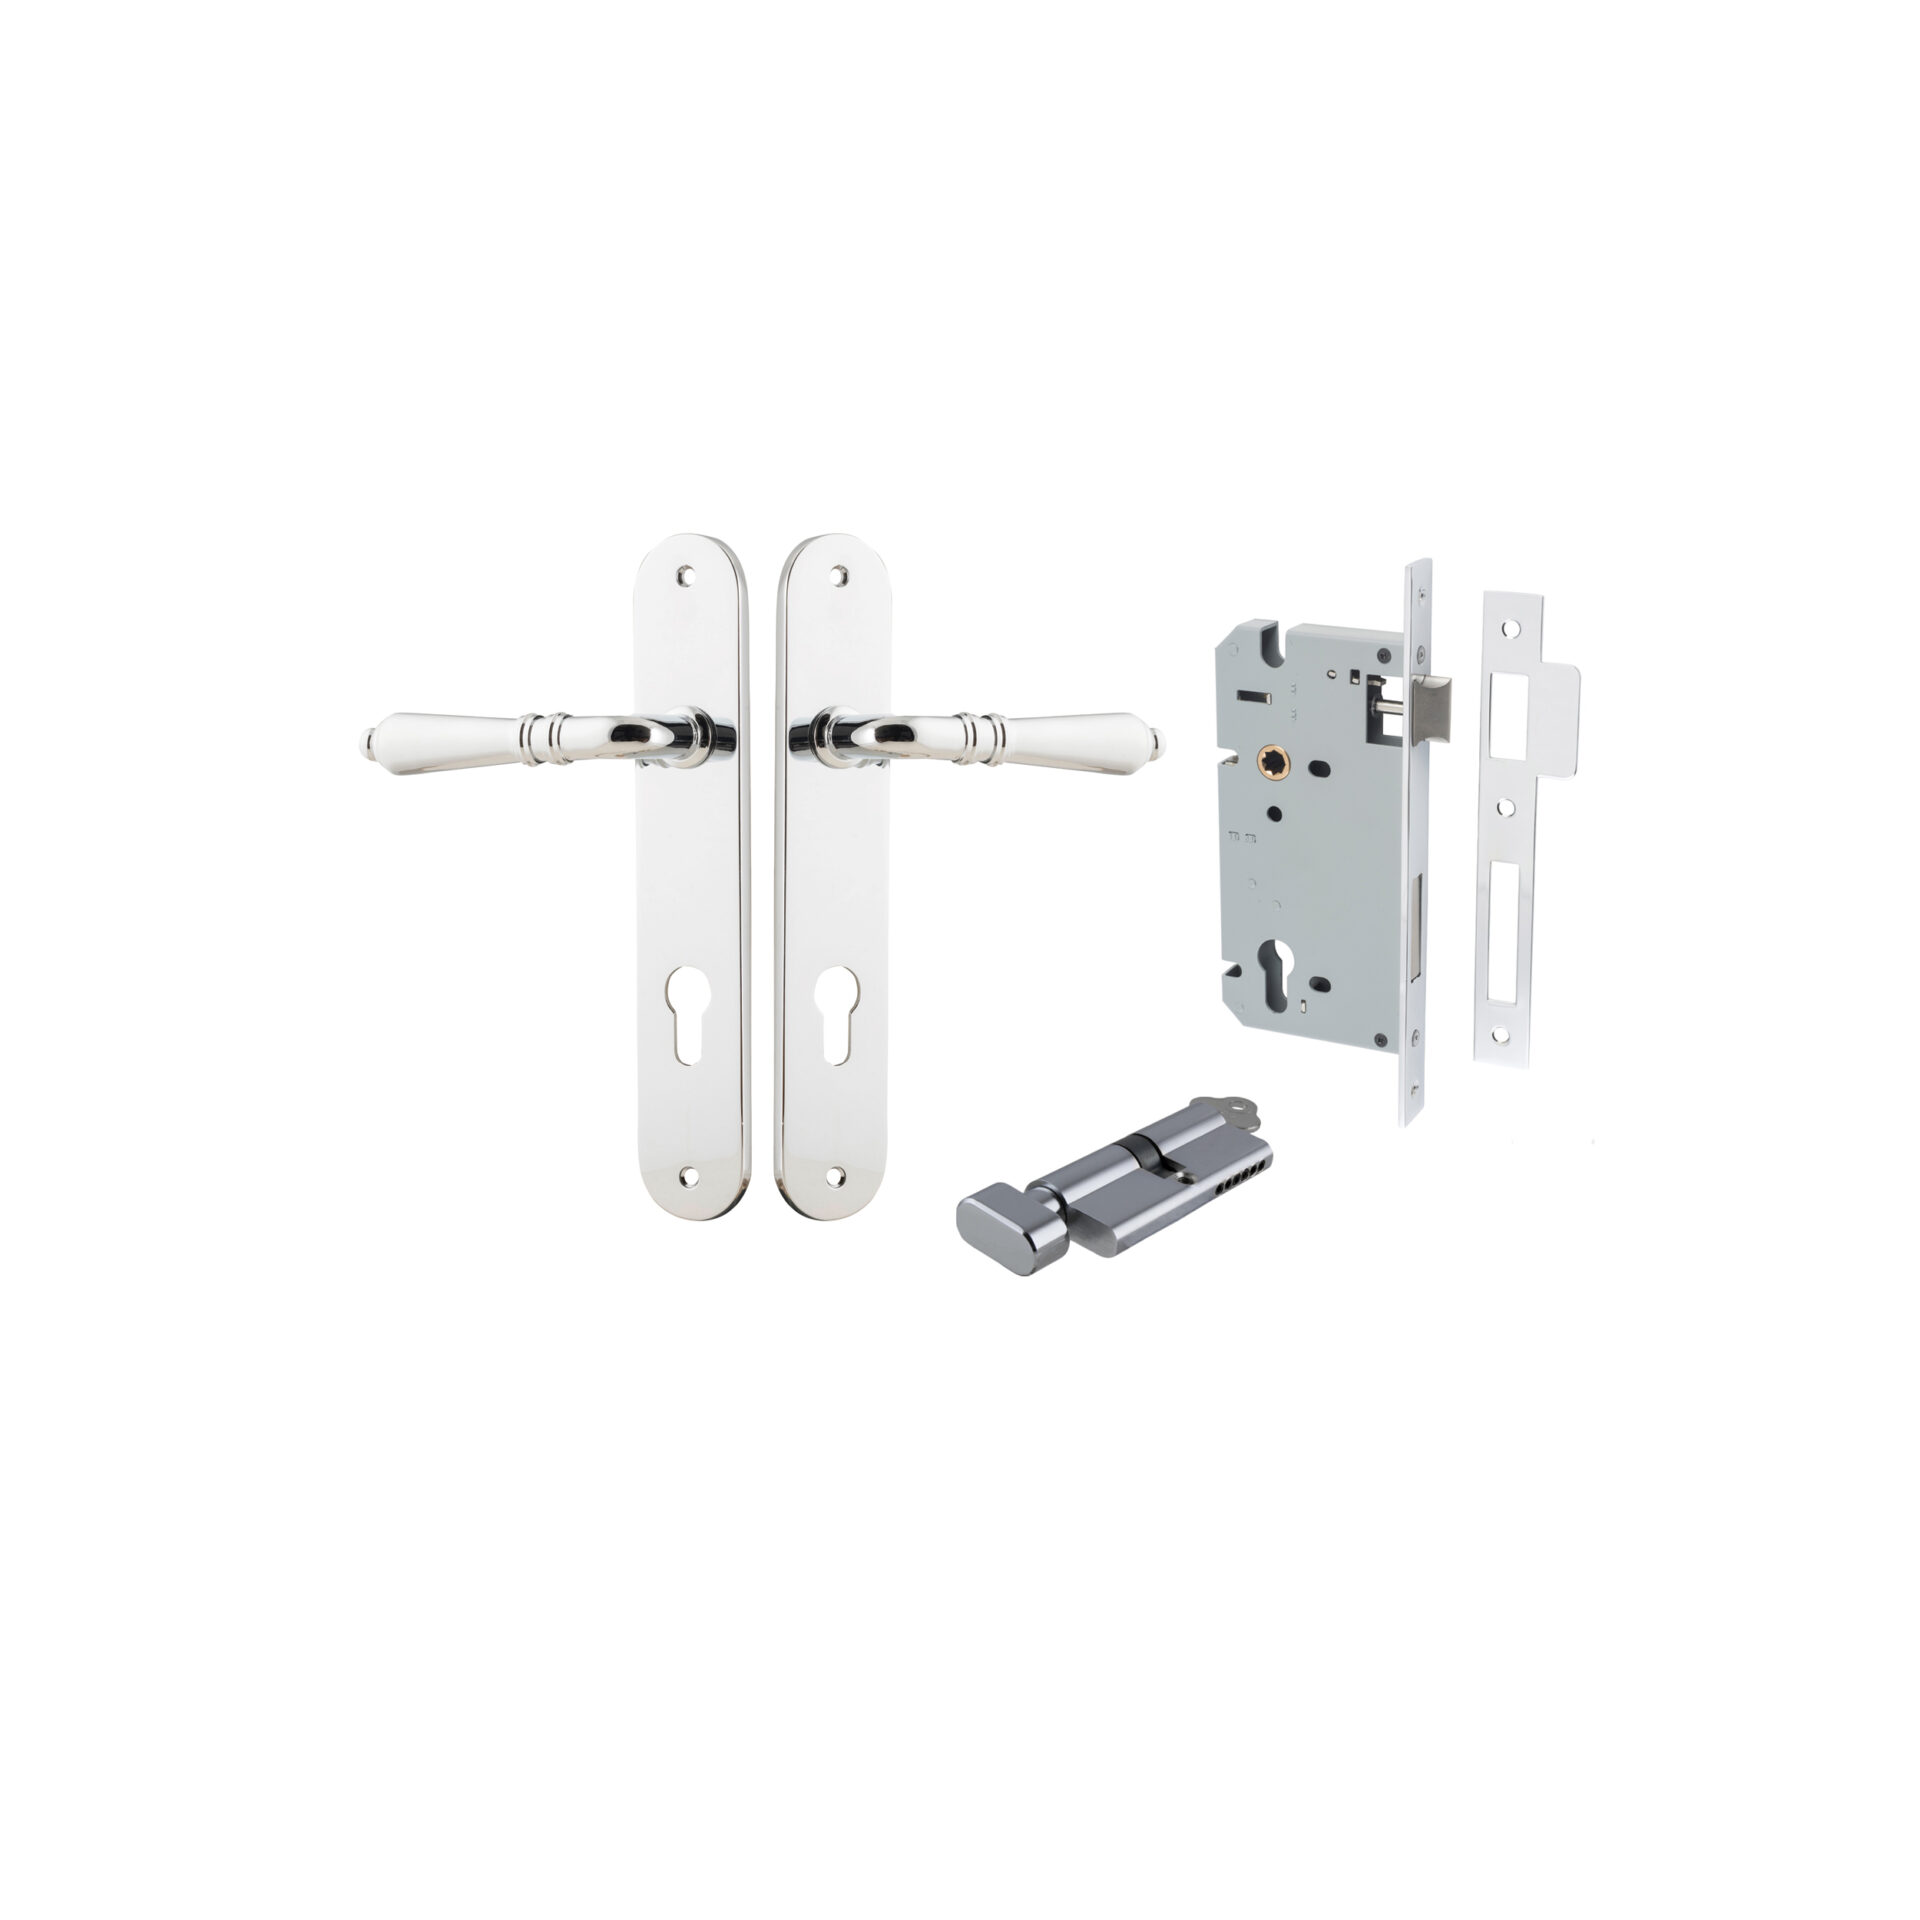 Sarlat Lever - Oval Backplate Entrance Kit with High Security Lock